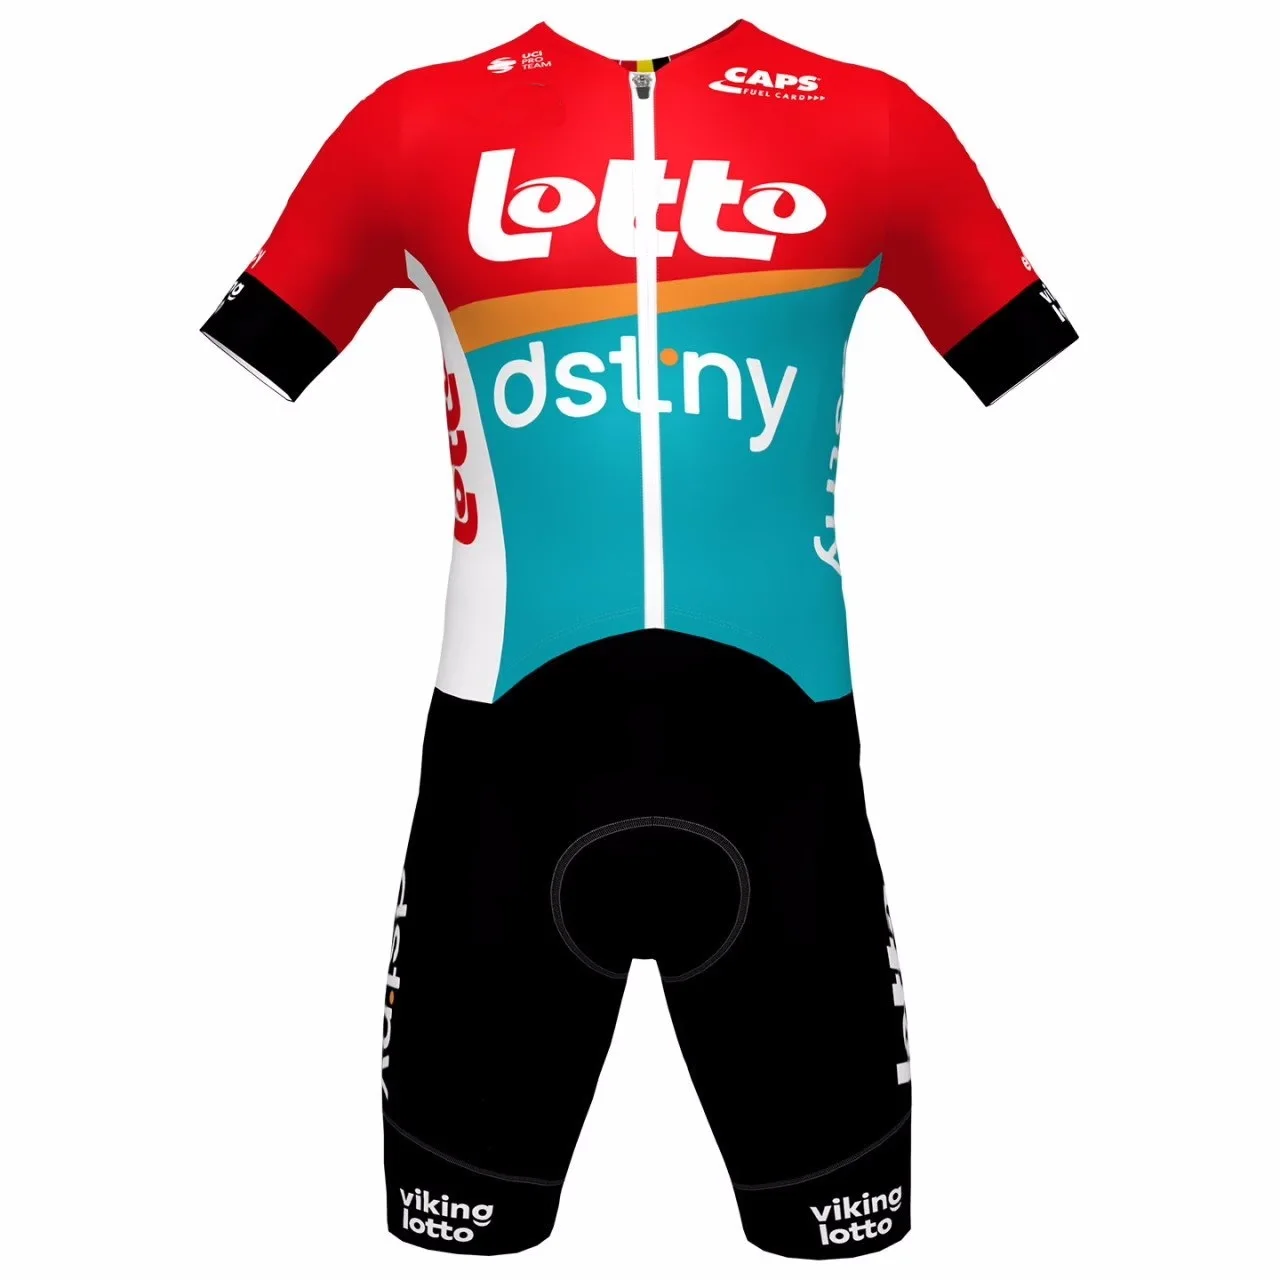 

LASER CUT Skinsuit 2023 Lotto Dstny TEAM Bodysuit SHORT Cycling Jersey Bike Bicycle Clothing Maillot Ropa Ciclismo